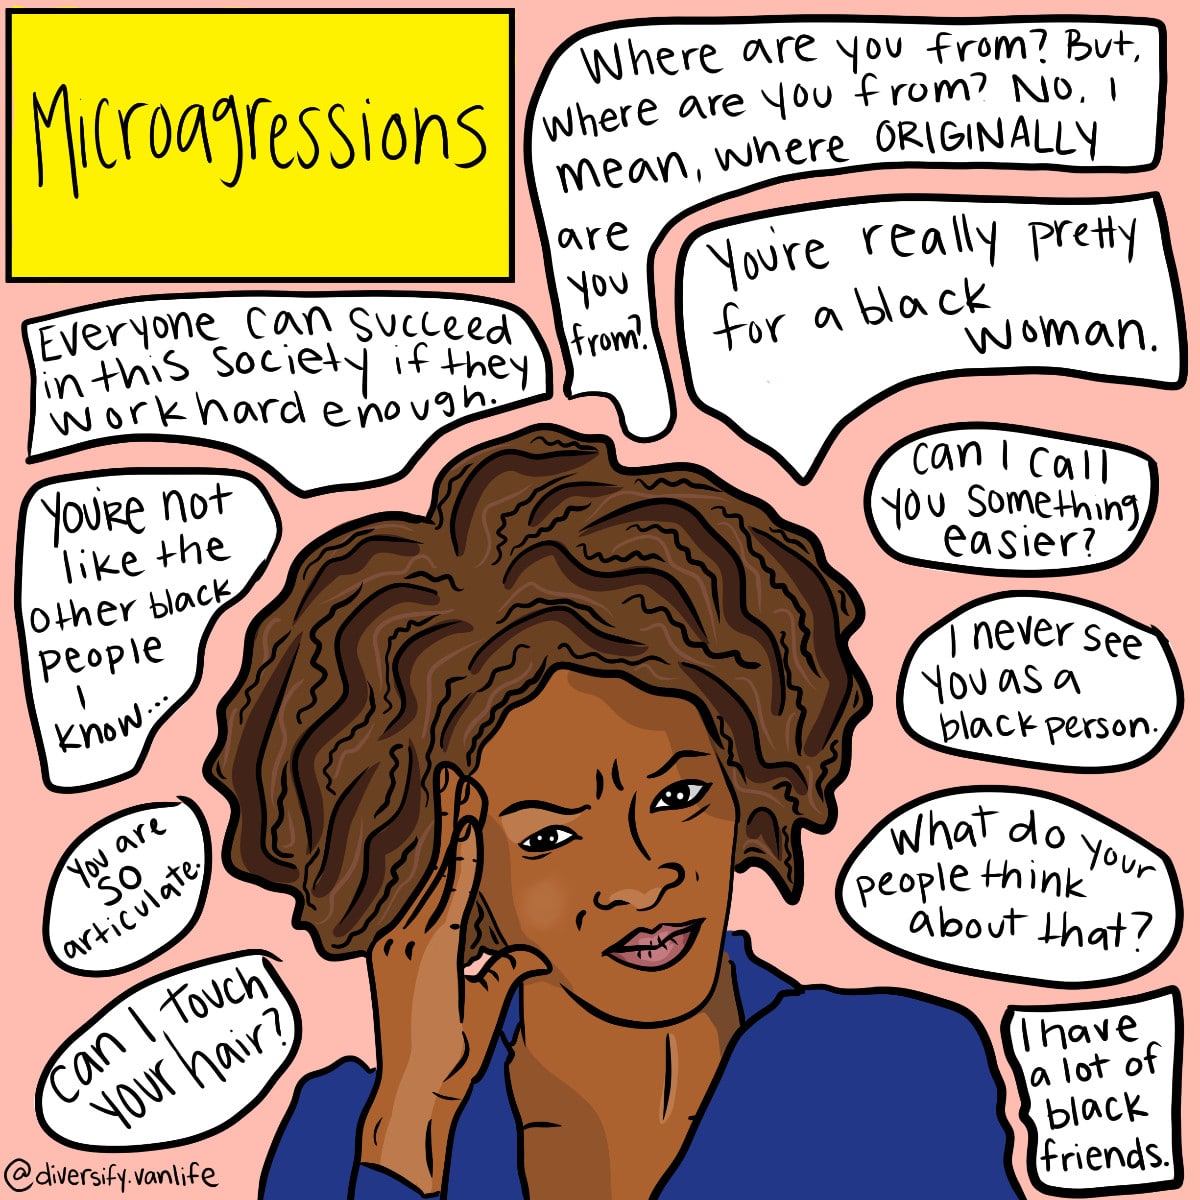 Comic depicting some of the microagressions that people of color are exposed to on a daily basis